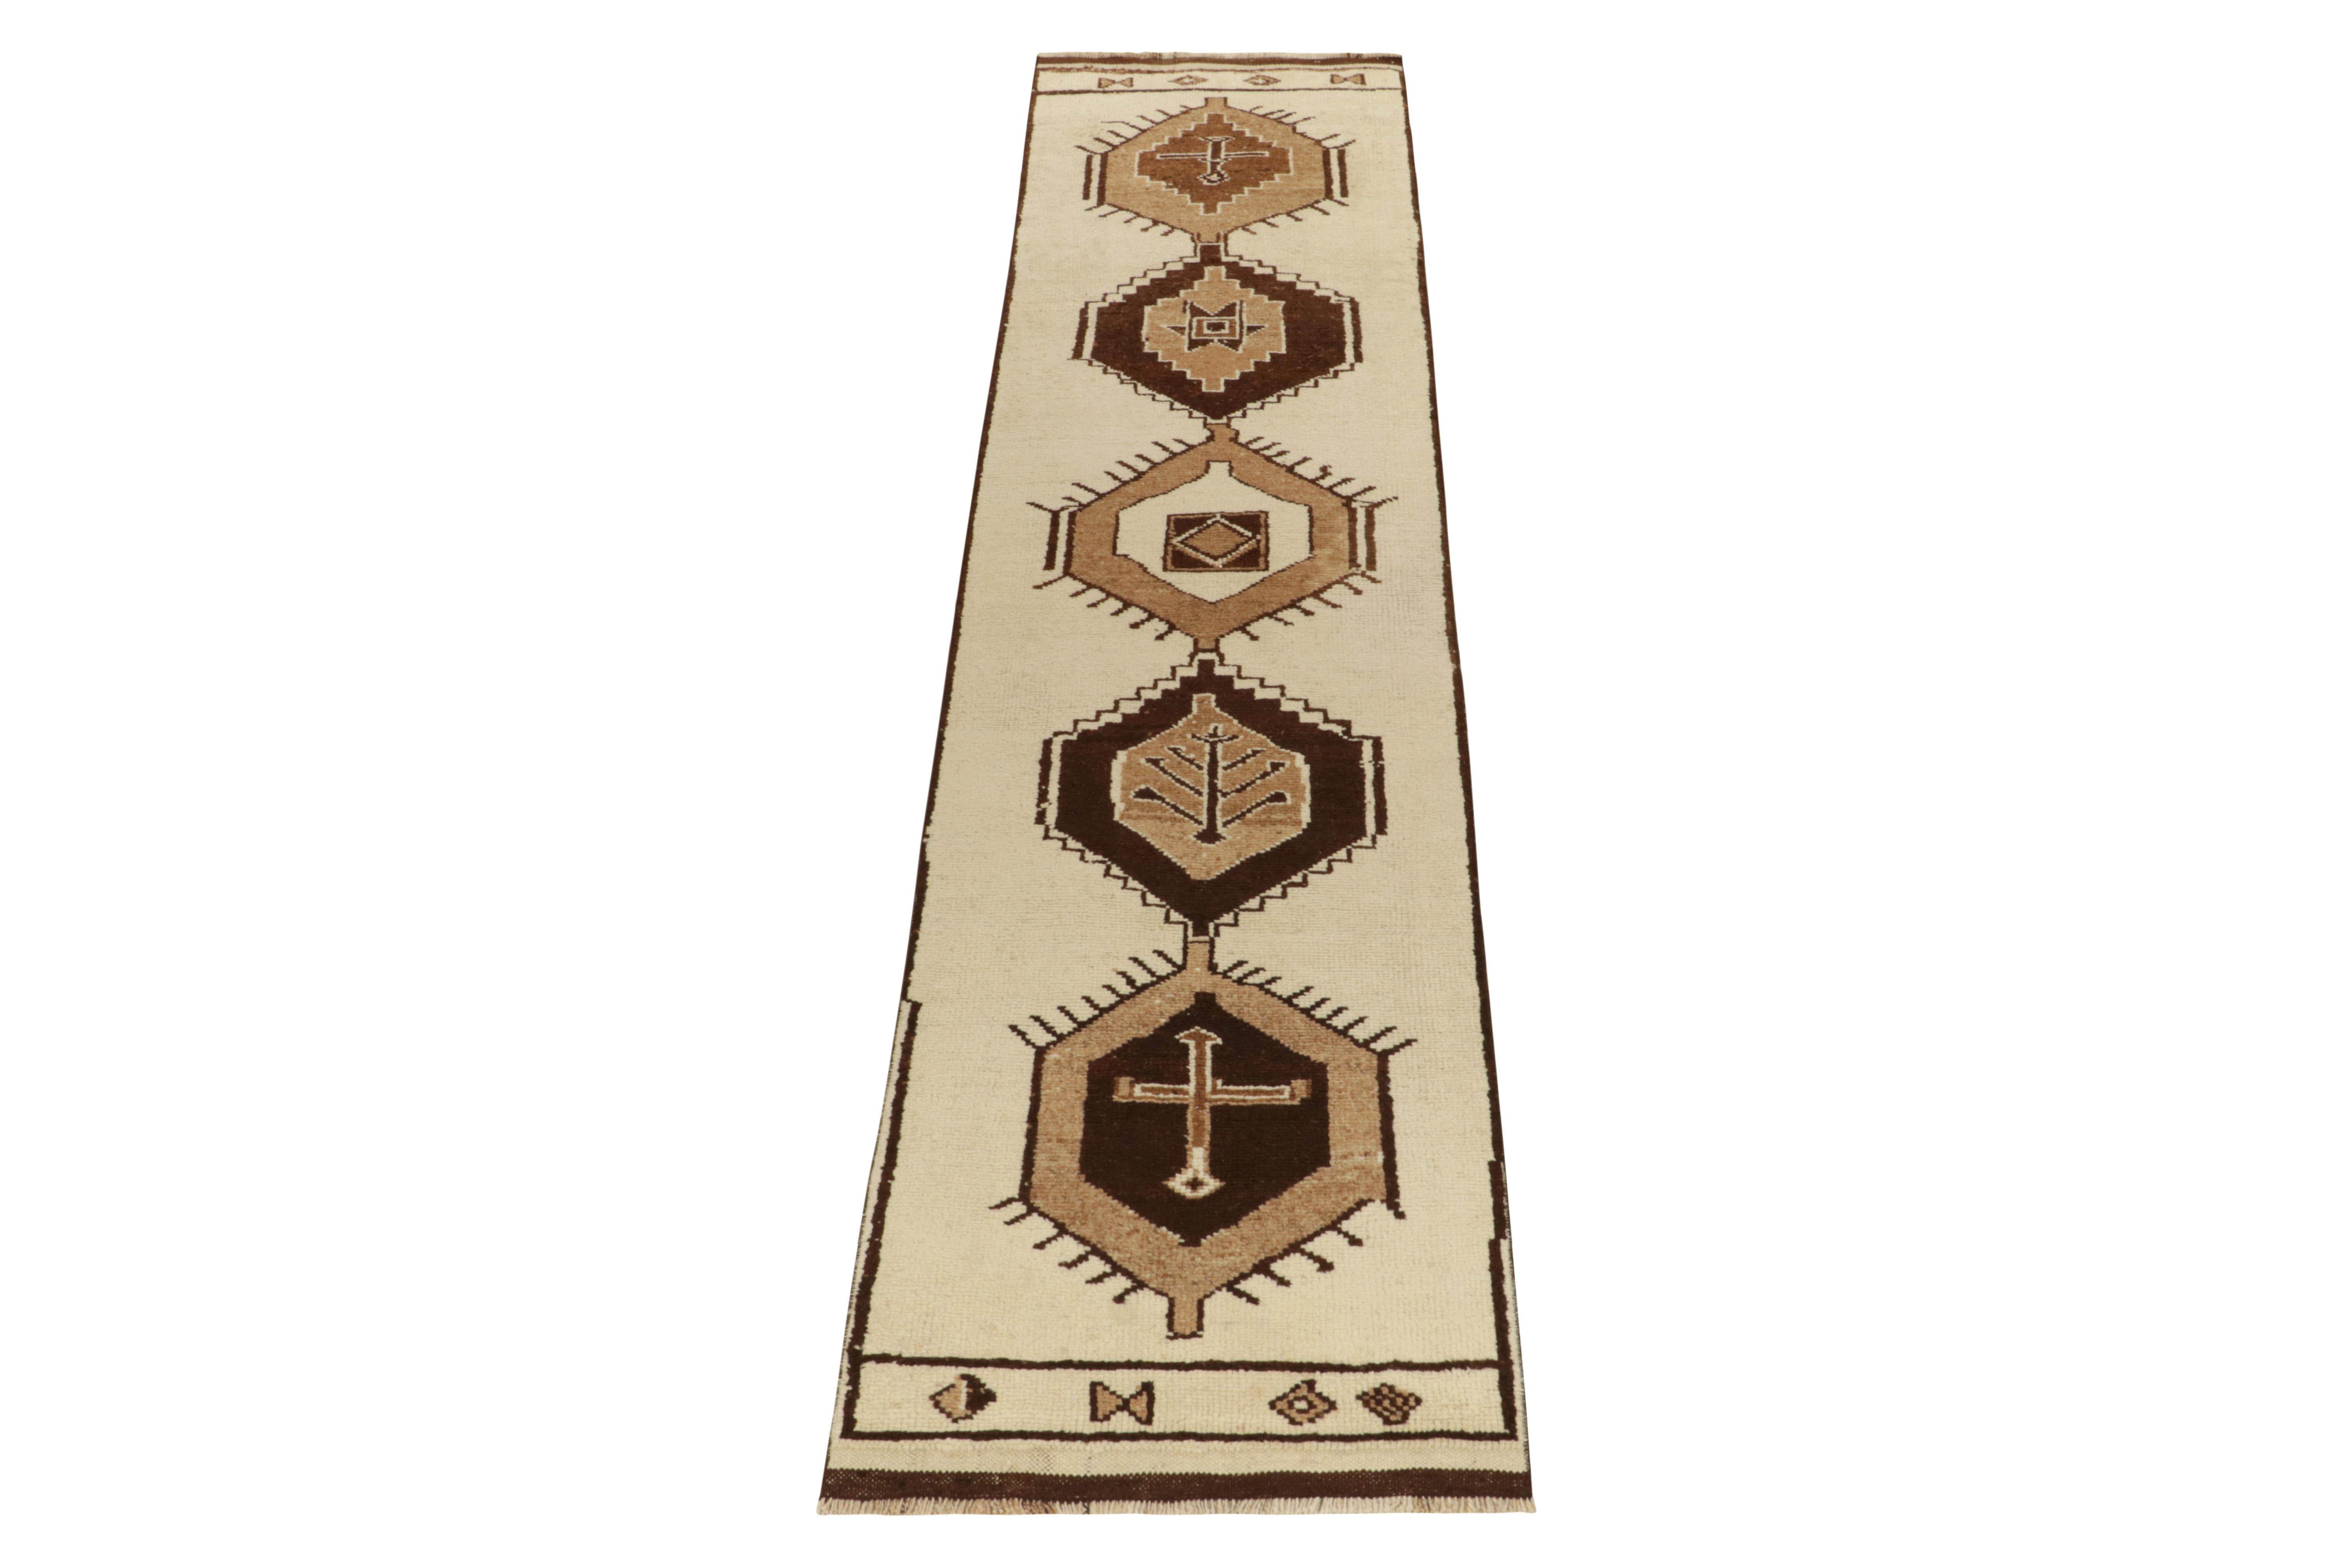 From Rug & Kilim’s vintage selections, a 3x12 hand-knotted wool runner from Turkey bearing striking nomadic influences. 

The 1950s tribal piece showcases traditional motifs on the field in creamy white & beige brown tones casting a gorgeous